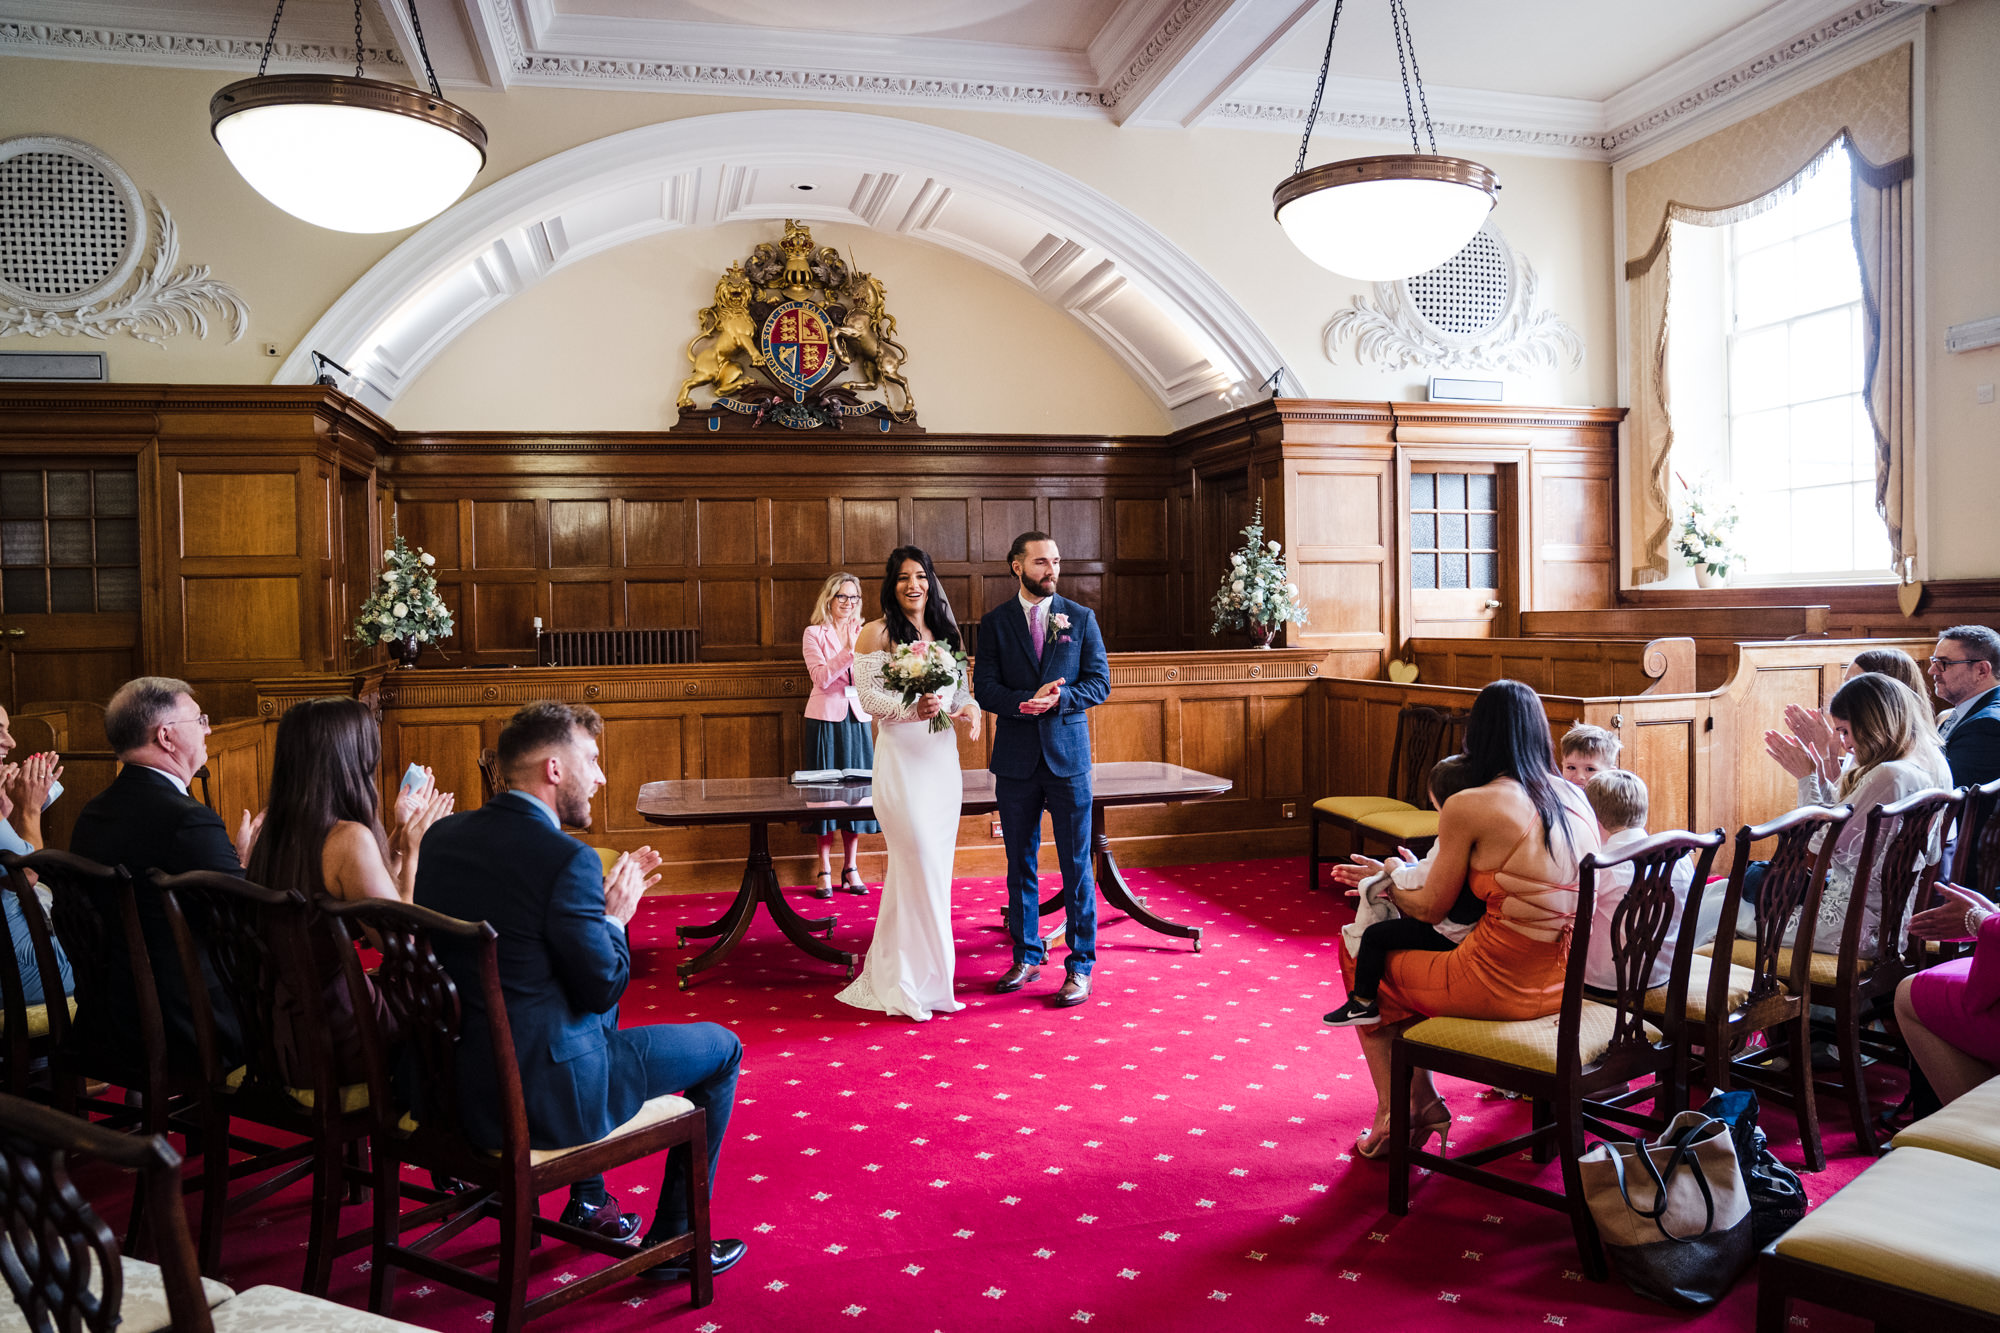 guests clap and celebrate their marriage in the ceremony room at bath guildhall